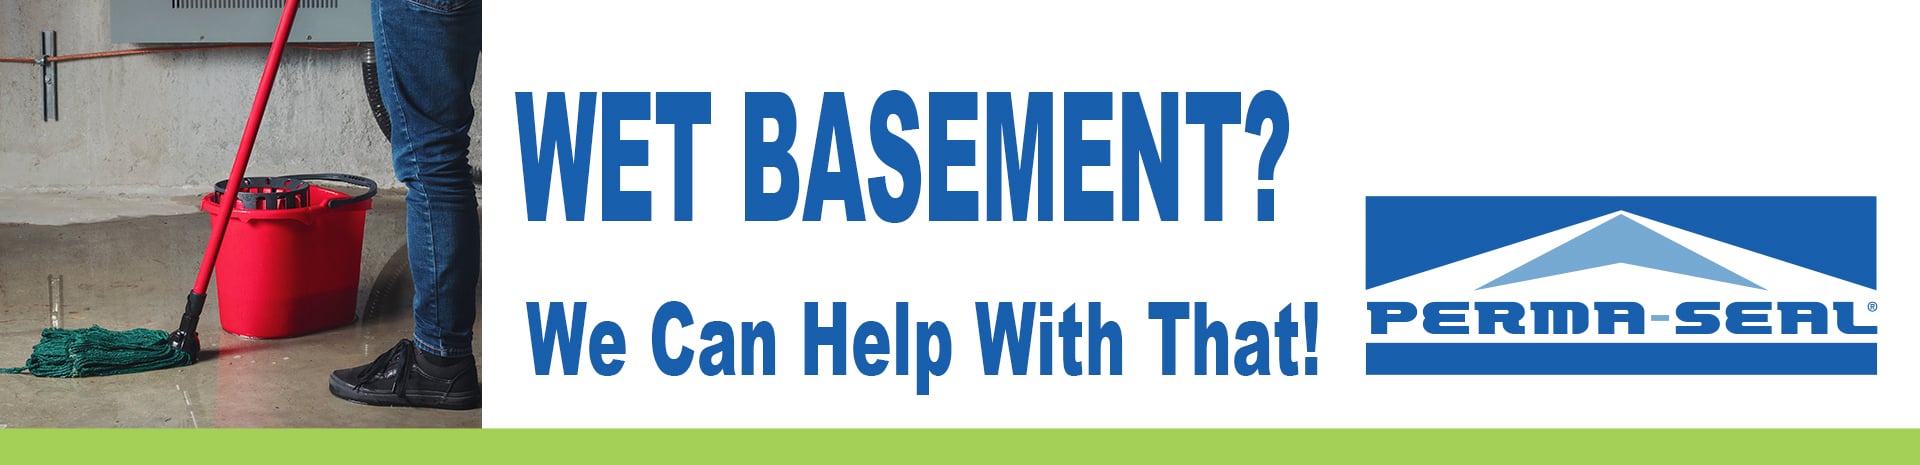 Wet Basement? Perma-Seal Can Help With That